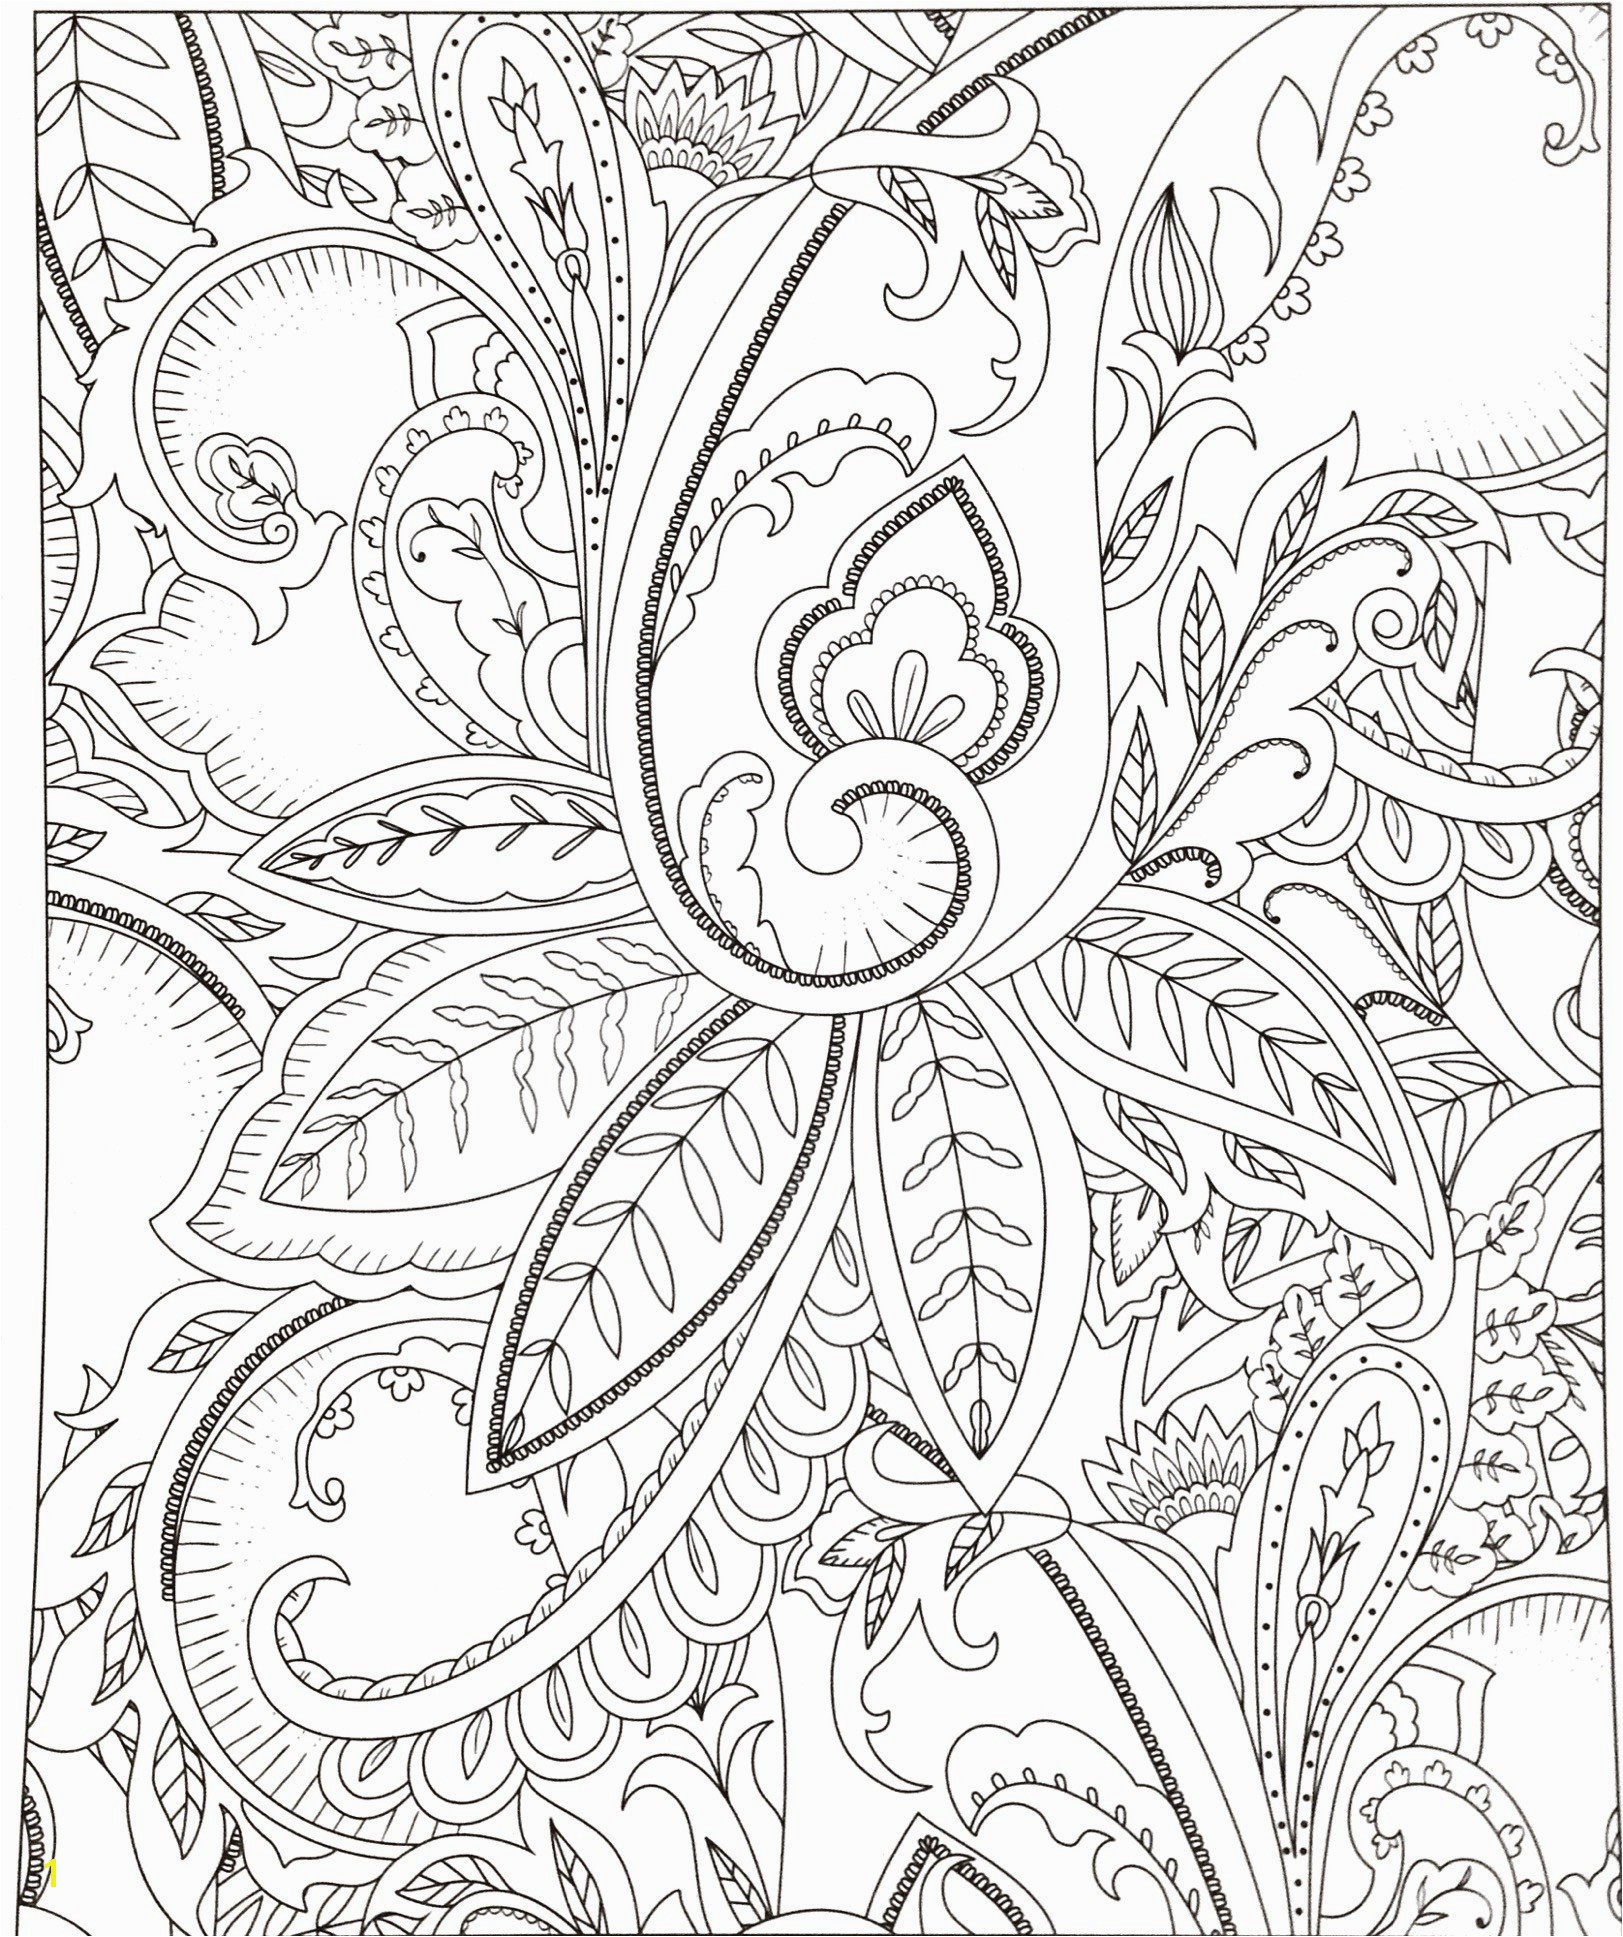 Free Printable Bff Coloring Pages Coloring Book for Windows 7 Coloring Pages